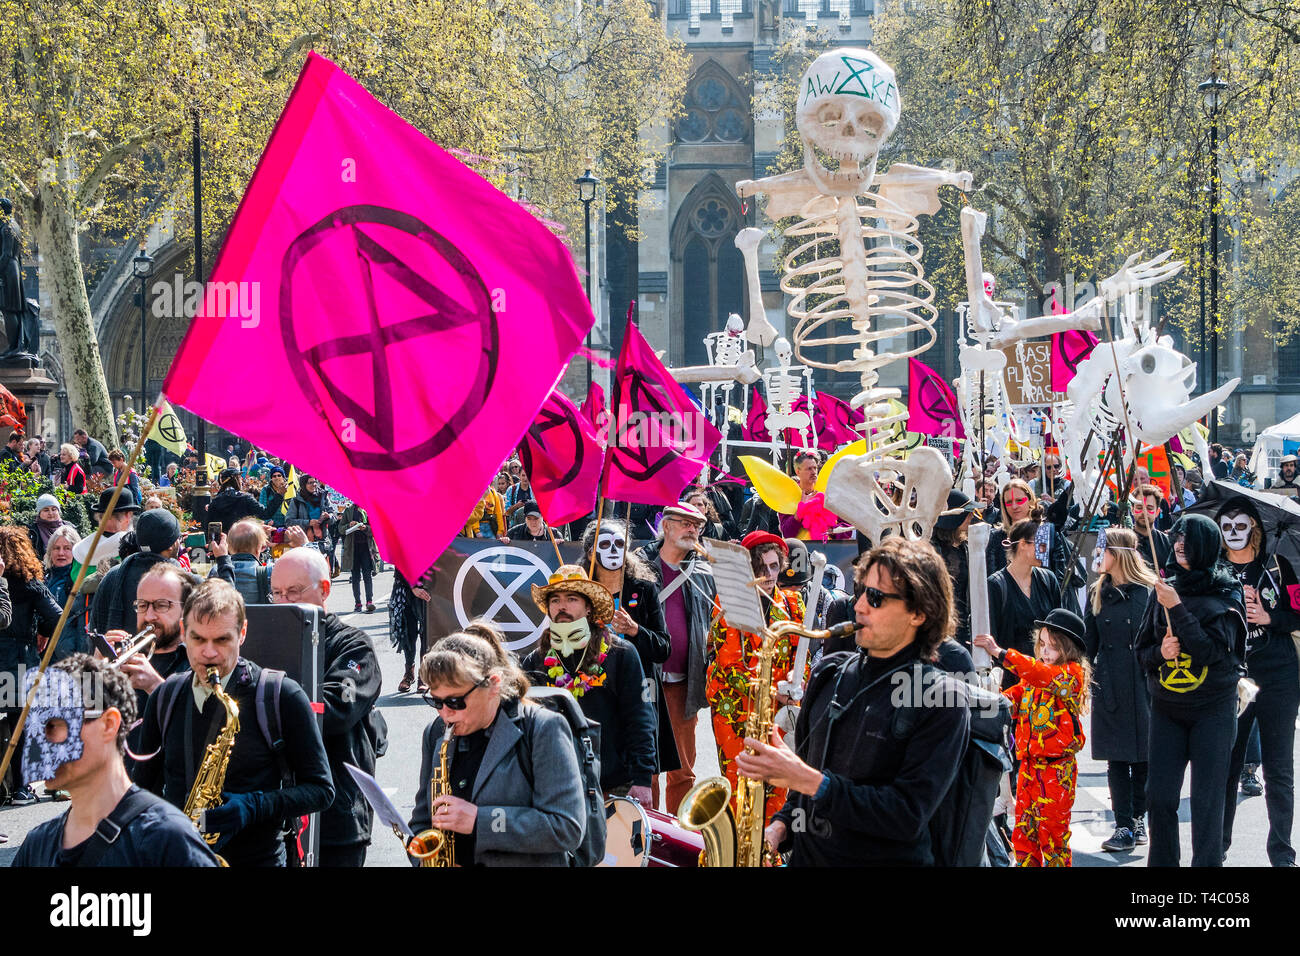 London, UK. 15th April, 2019. Protestors from Extinction Rebellion block several (Hyde Park, Oxford Cuircus, Piccadilly Circus, Warterloo Bridge and Parliament Square) junctions in London as part of their ongoing protest to demand action by the UK Government on the 'climate chrisis'. The action is part of an international co-ordinated protest. Credit: Guy Bell/Alamy Live News Stock Photo